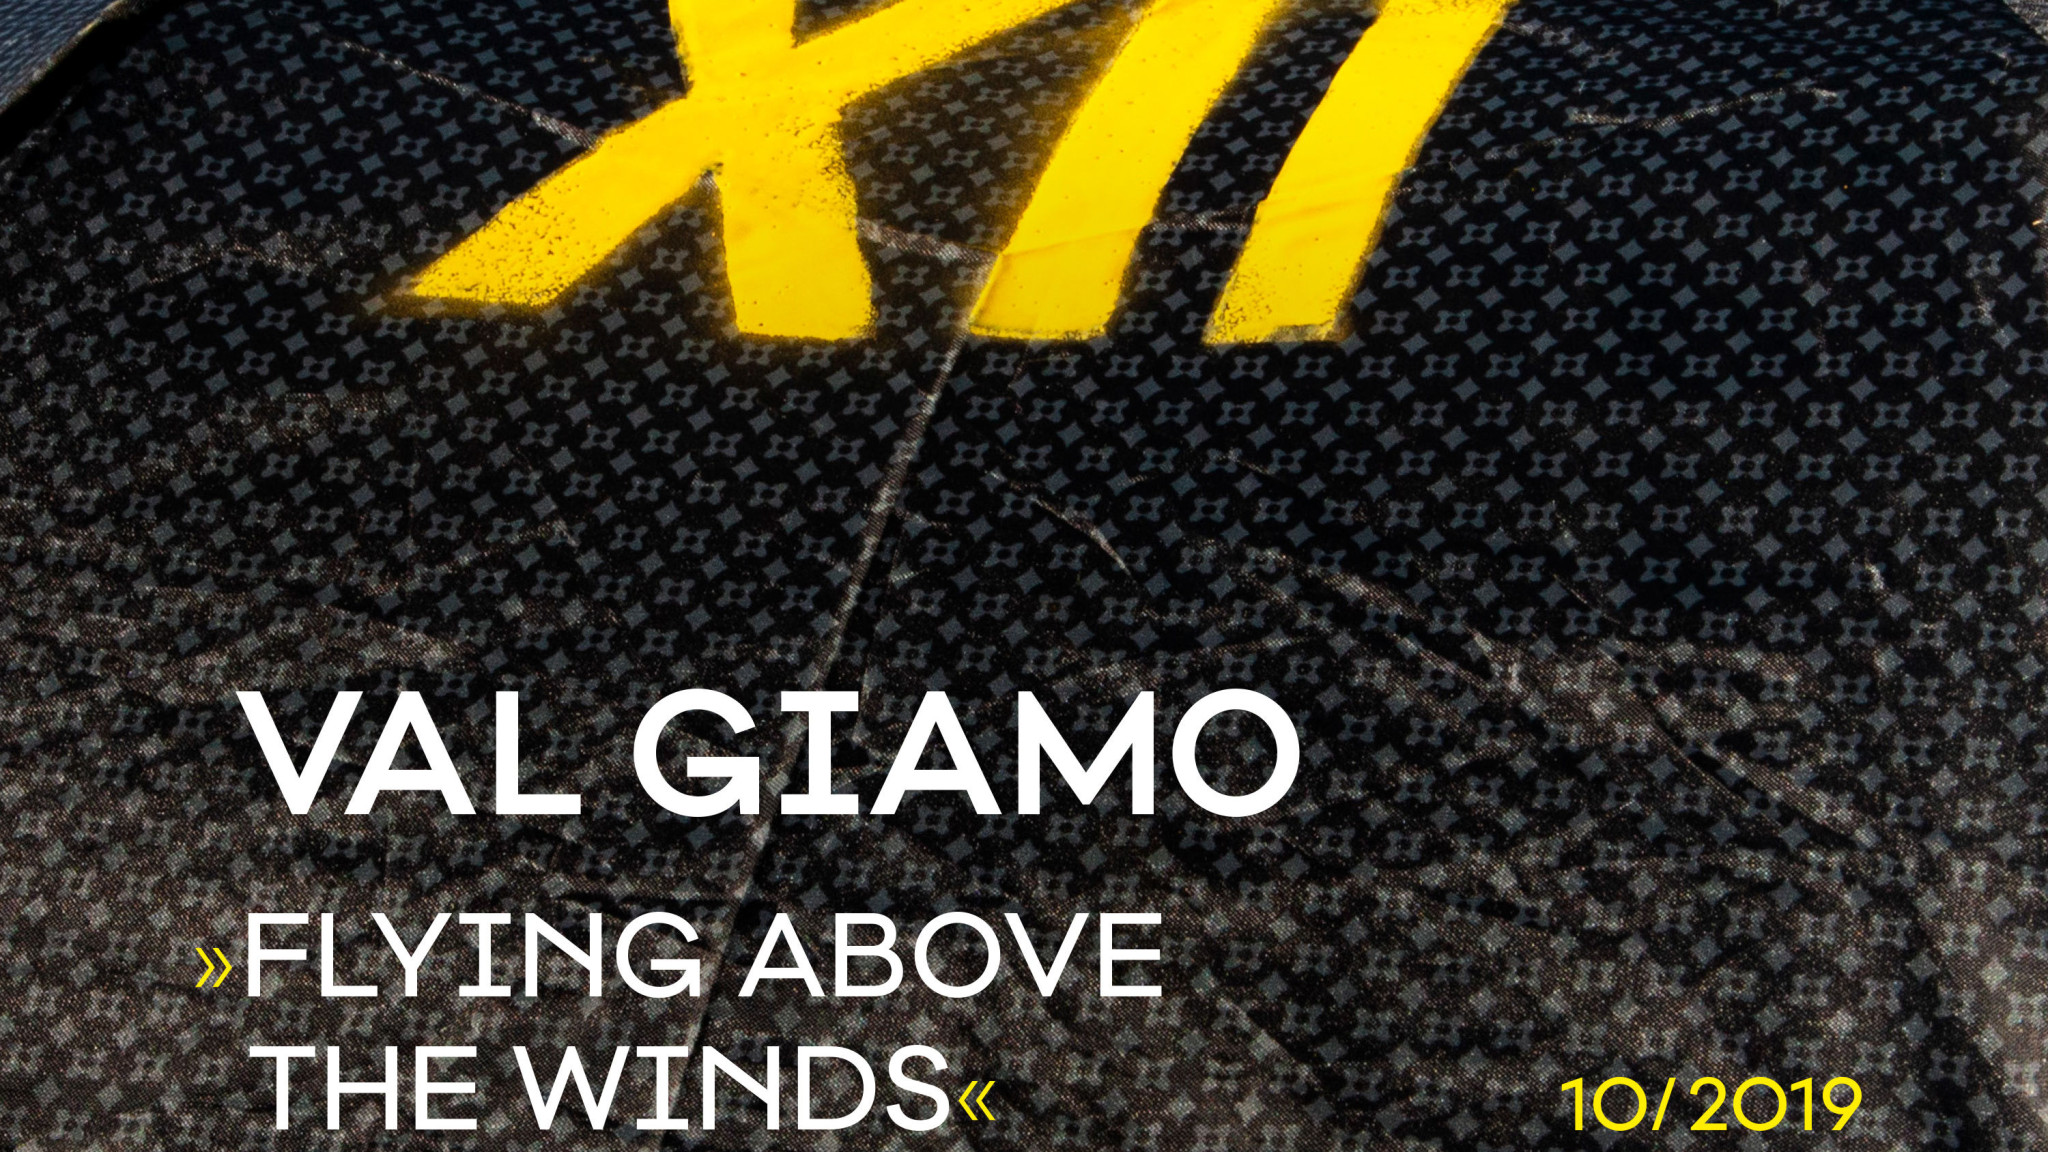 Reise des Lebens – Val Giamos "Flying Above The Winds"